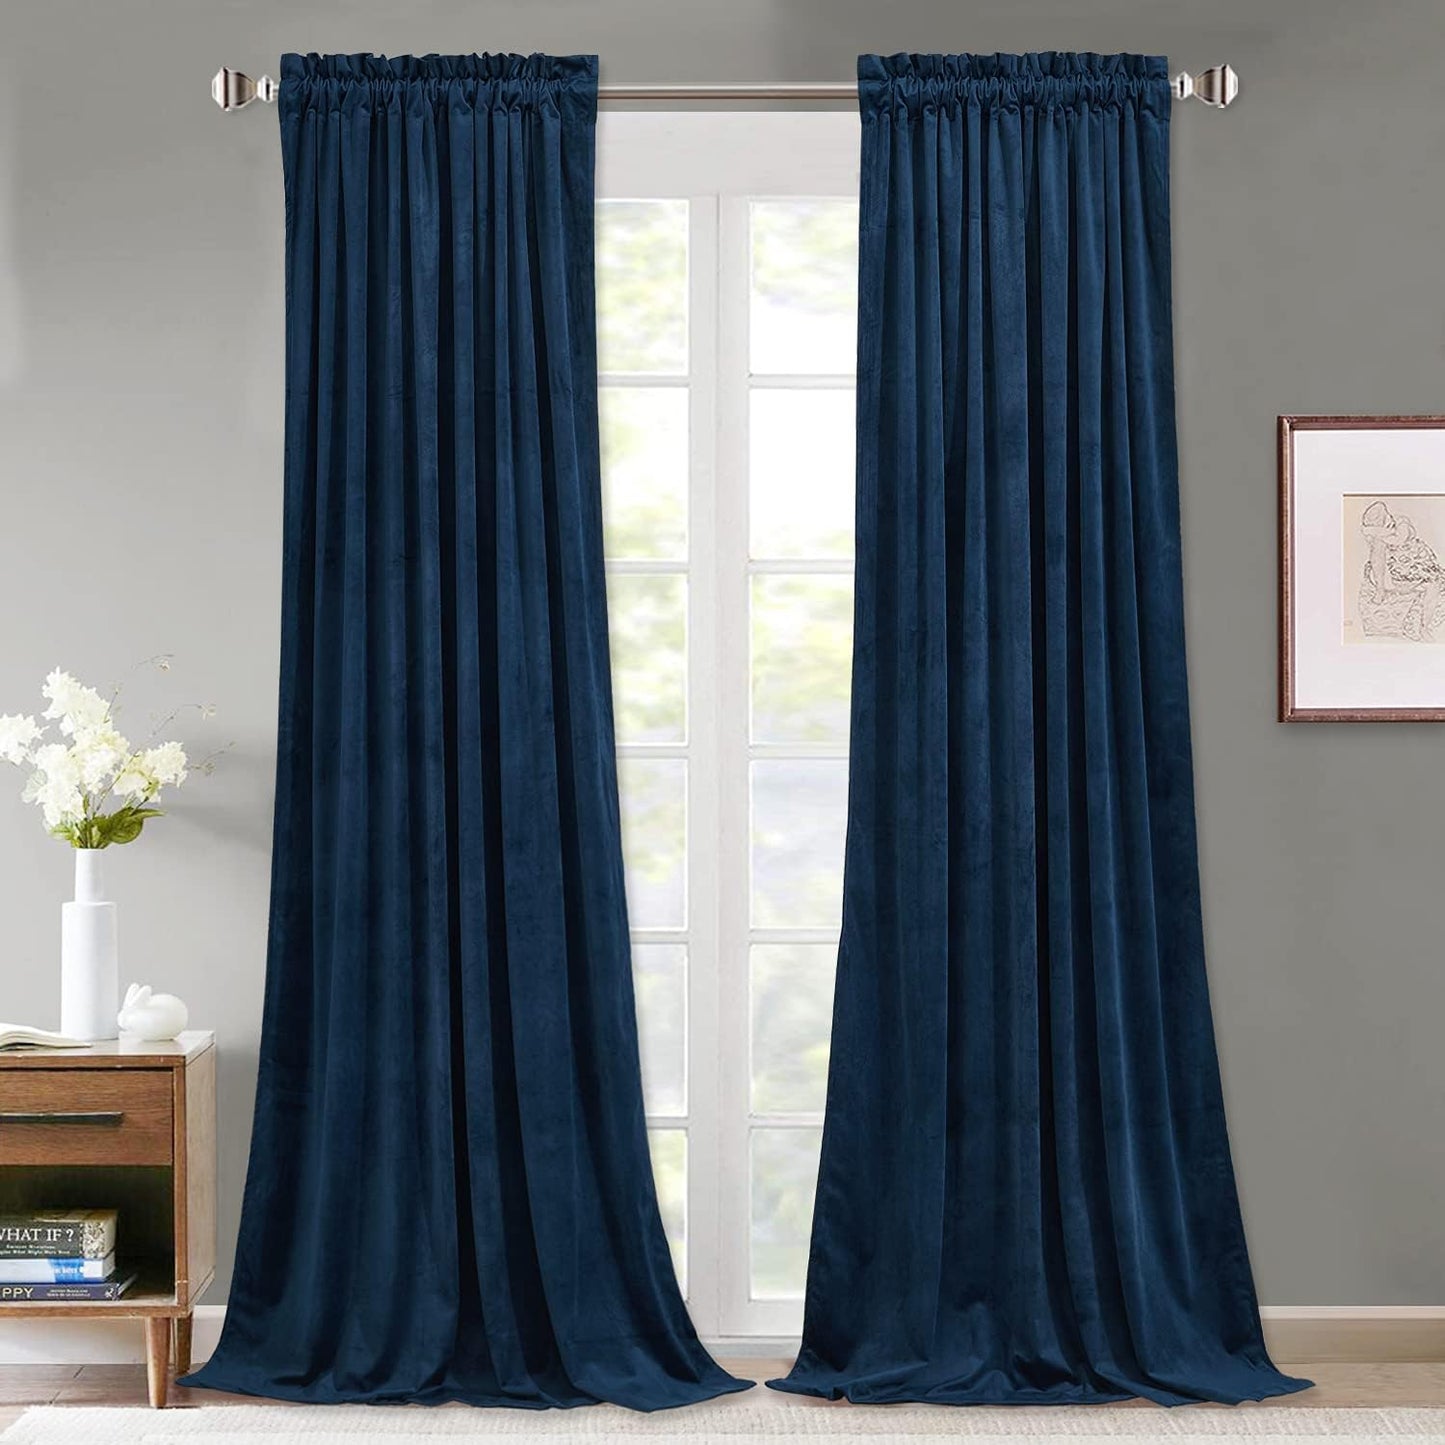 Stangh Theater Red Velvet Curtains - Super Soft Velvet Blackout Insulated Curtain Panels 84 Inches Length for Living Room Holiday Decorative Drapes for Master Bedroom, W52 X L84, 2 Panels  StangH Navy Blue W52" X L102" 